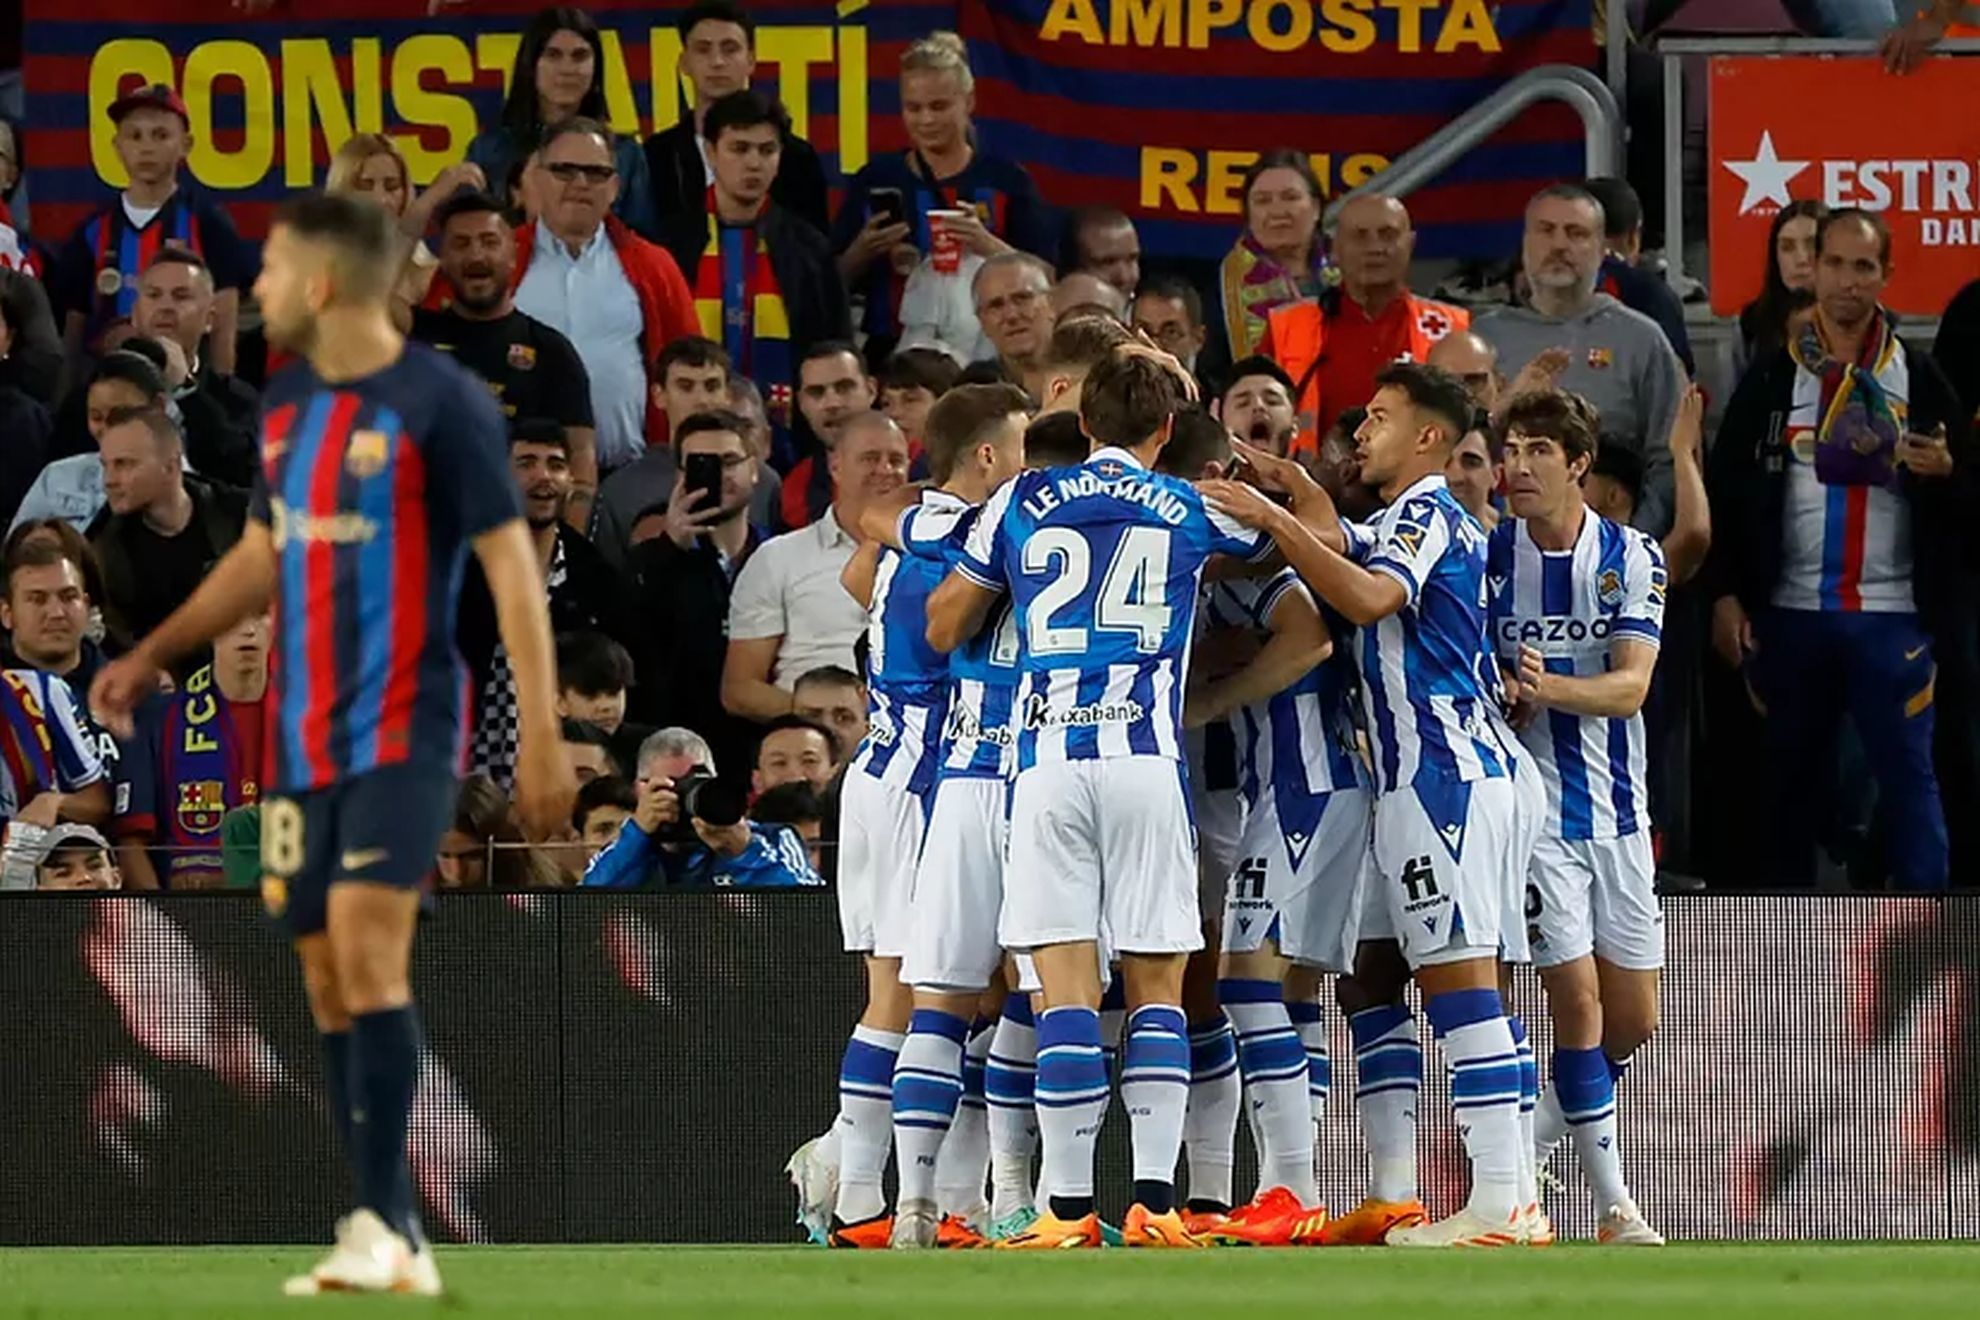 Champions Barcelona are beaten by Real Sociedad just before trophy lift